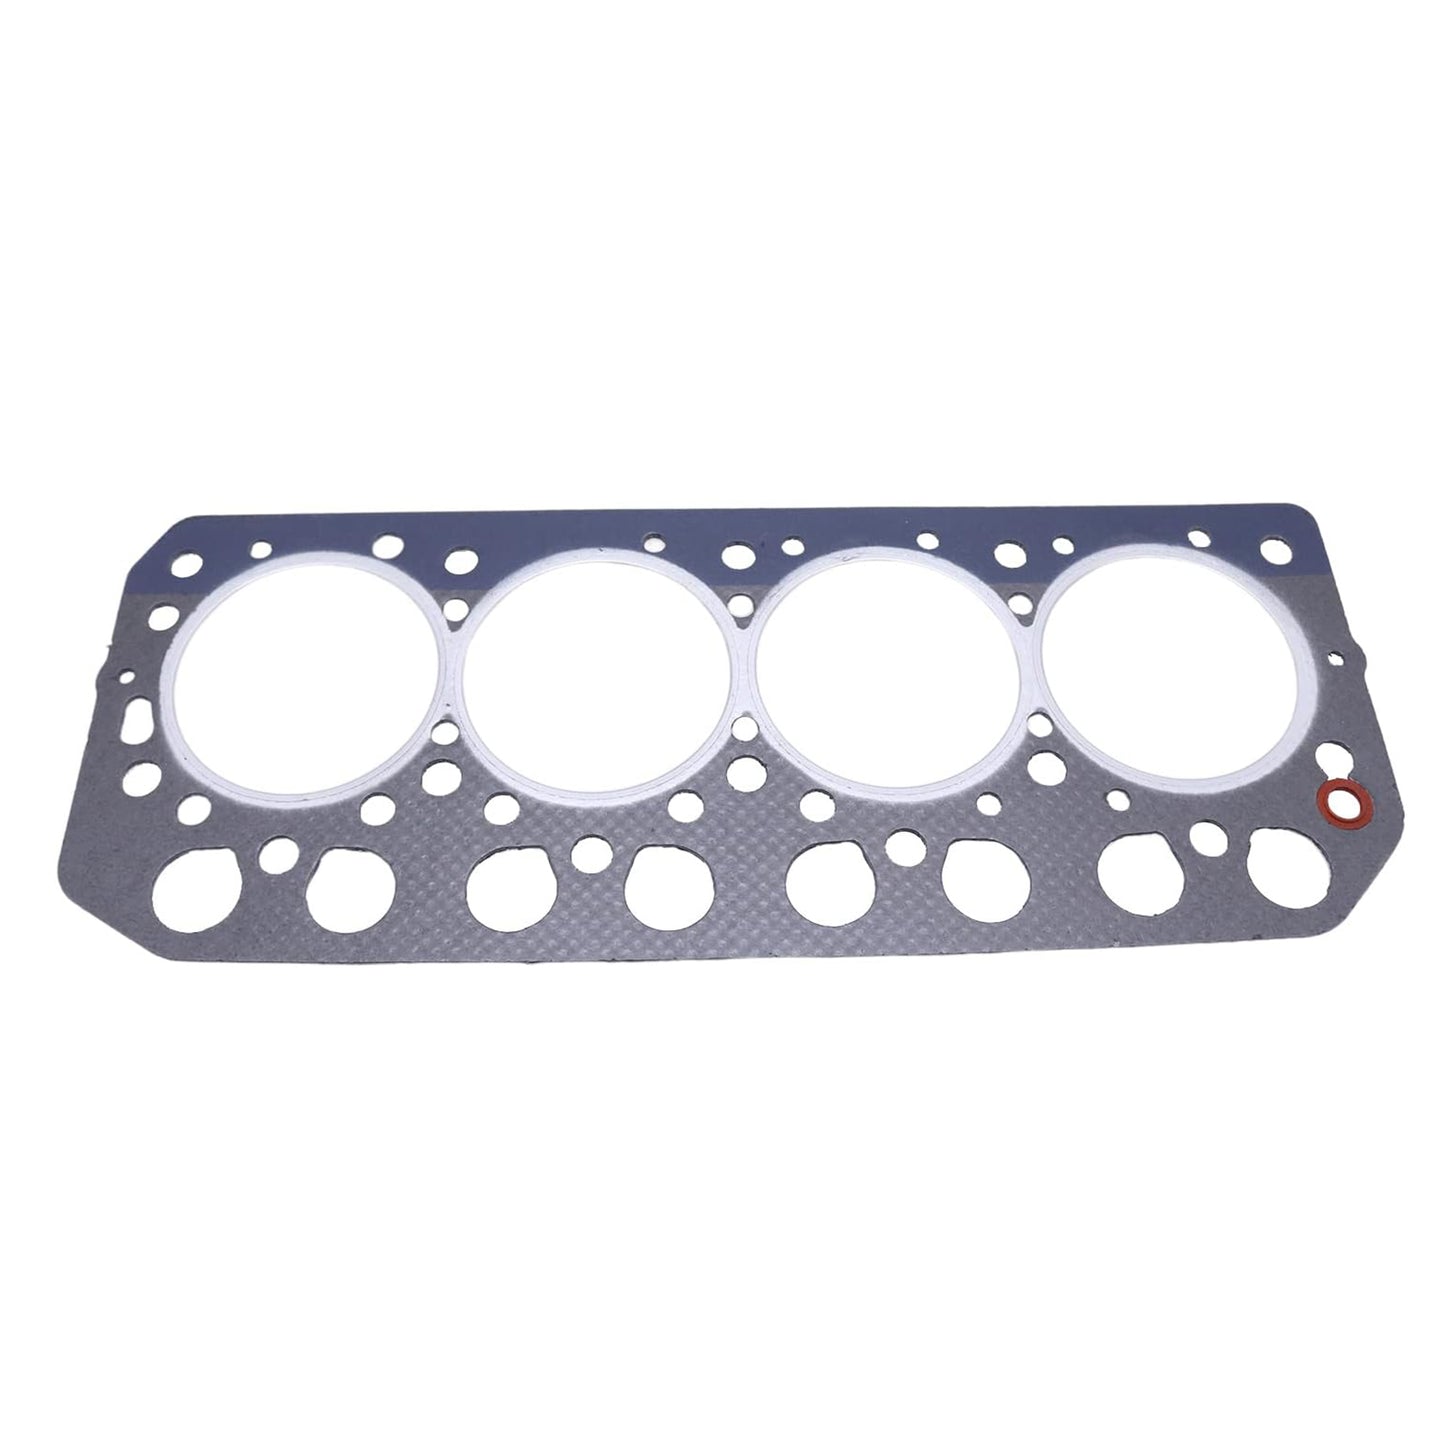 31A01-33300 Cylinder Head Gasket Compatible With Mitsubishi Engines S4L S4L2